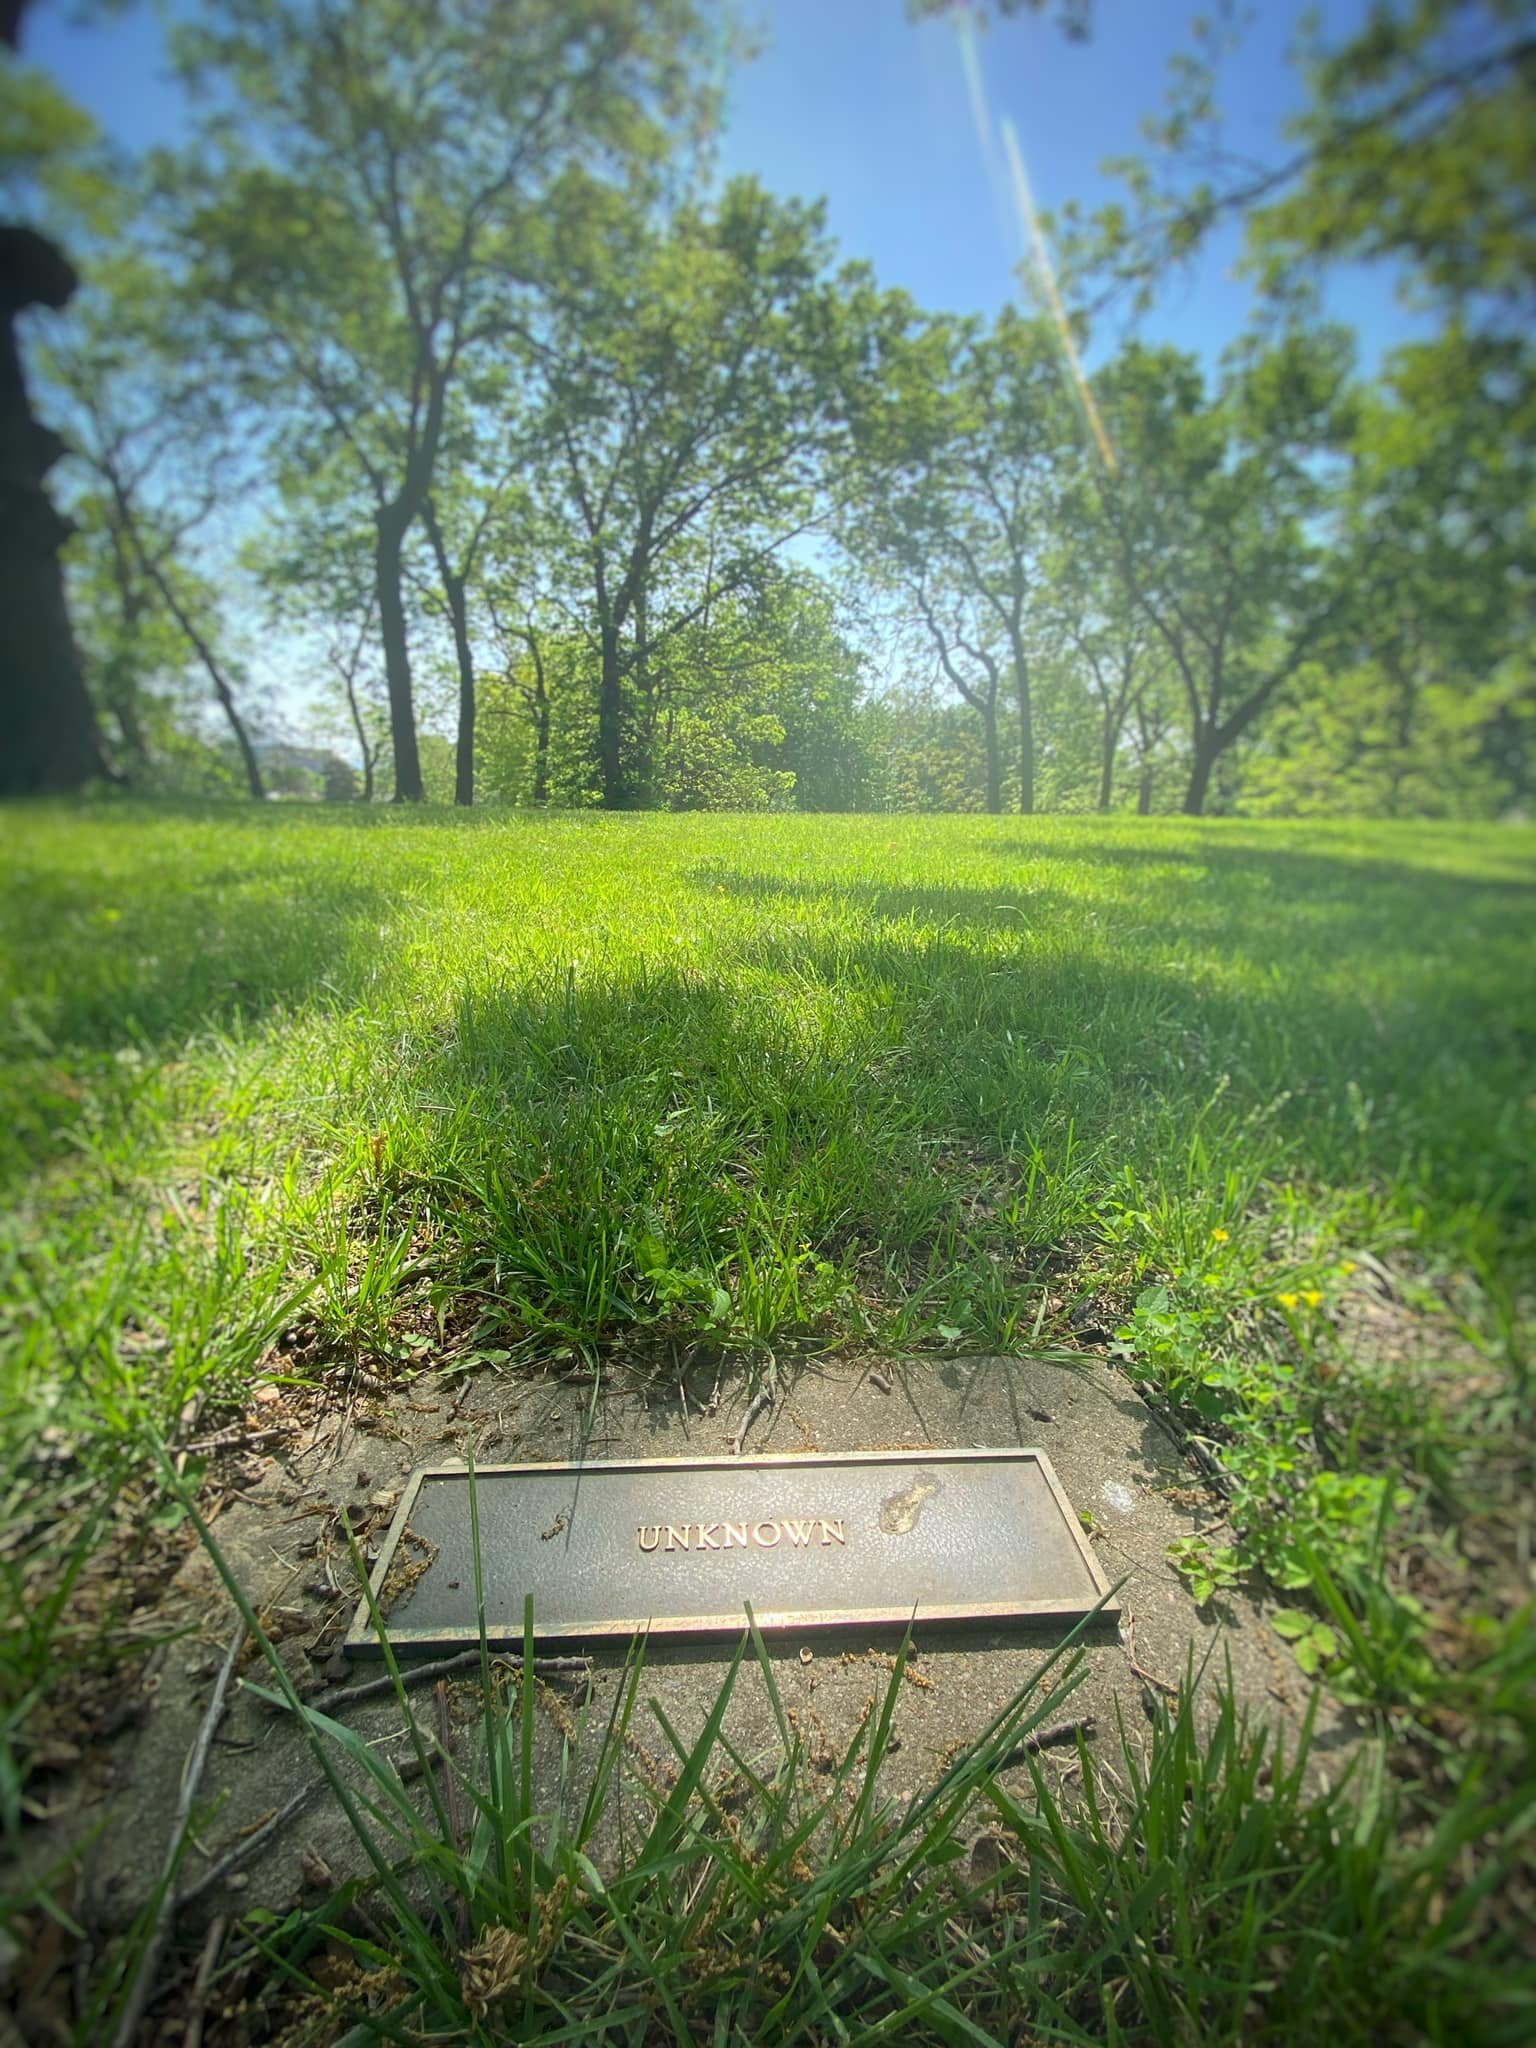  There are hundreds of graves here, many unmarked or whose names are unknown. They were mostly indigenous people but at one point some Union soldiers were also buried here. 